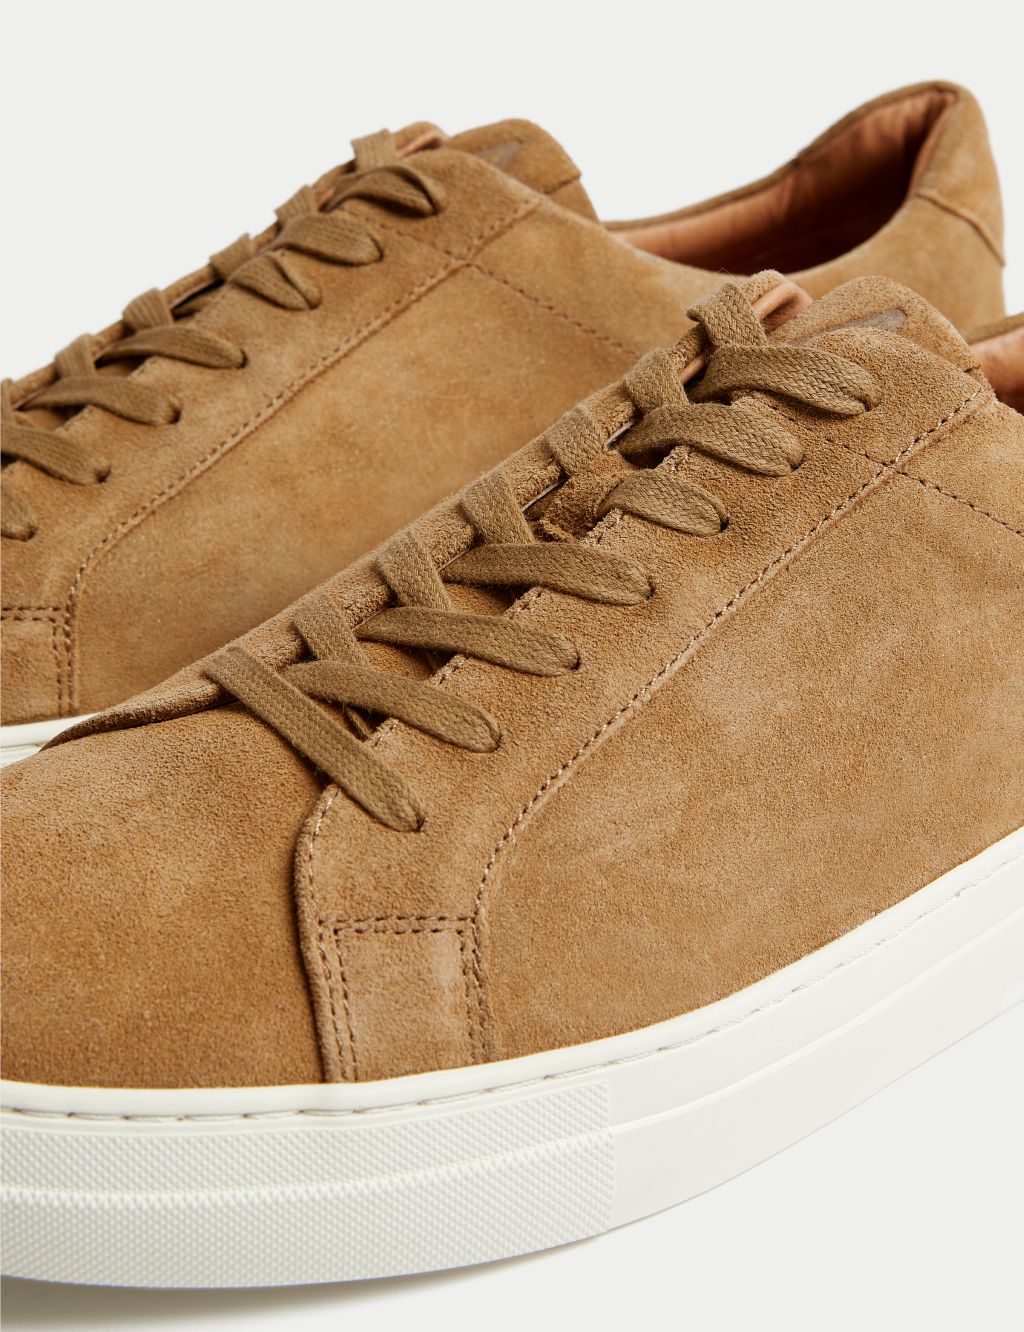 Suede Lace Up Trainers image 3